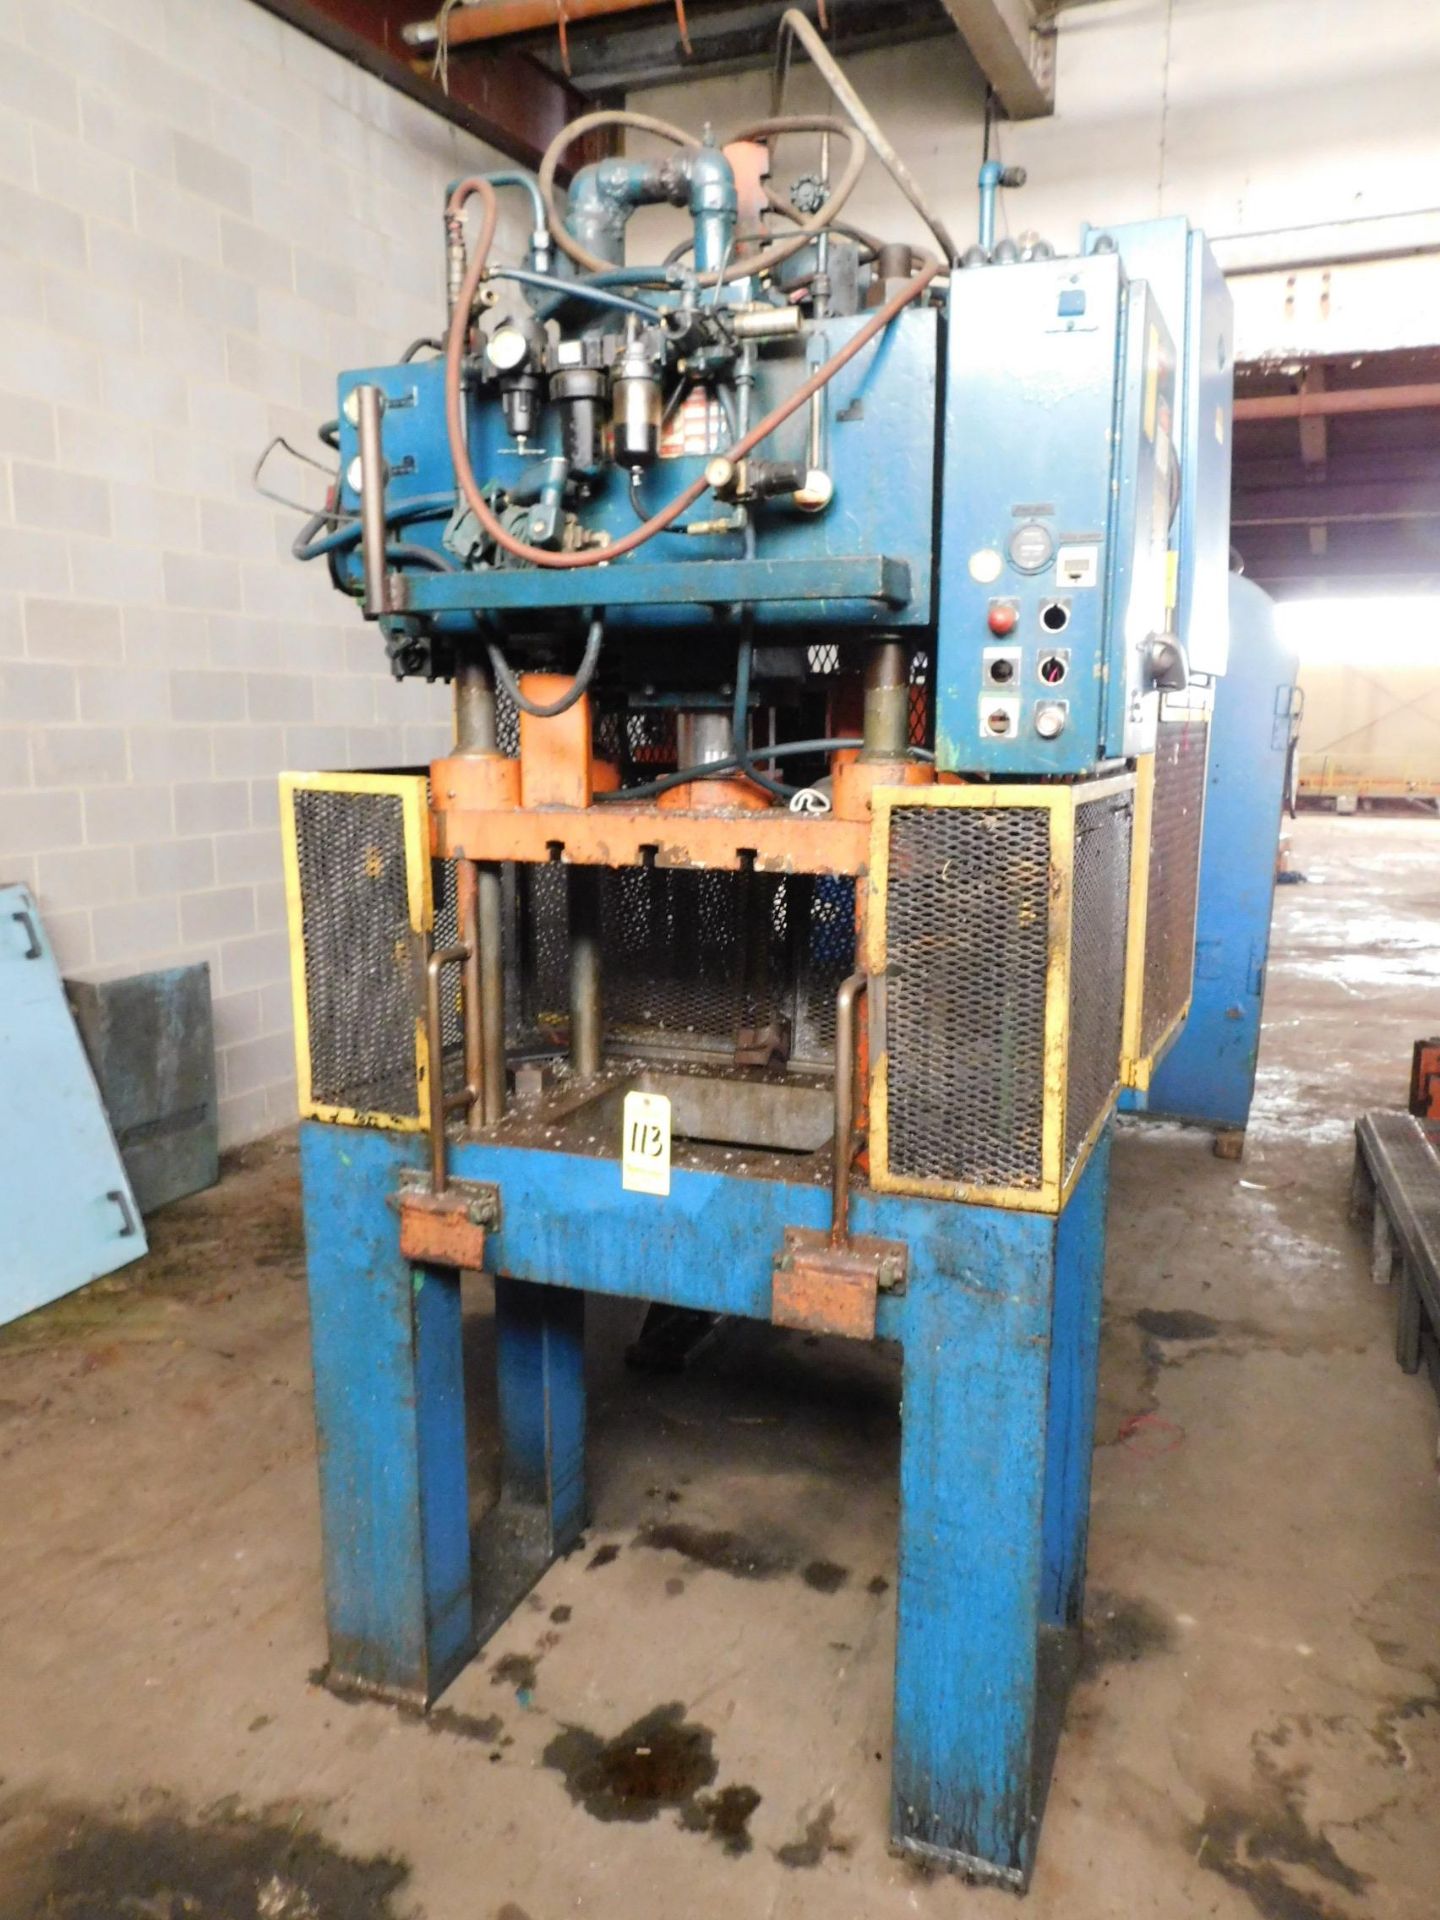 Kord 4-Post Hydraulic Press, 24" X 32" Bed and Ram, 20" Daylight with Ram Up, Approx. 10" Stroke